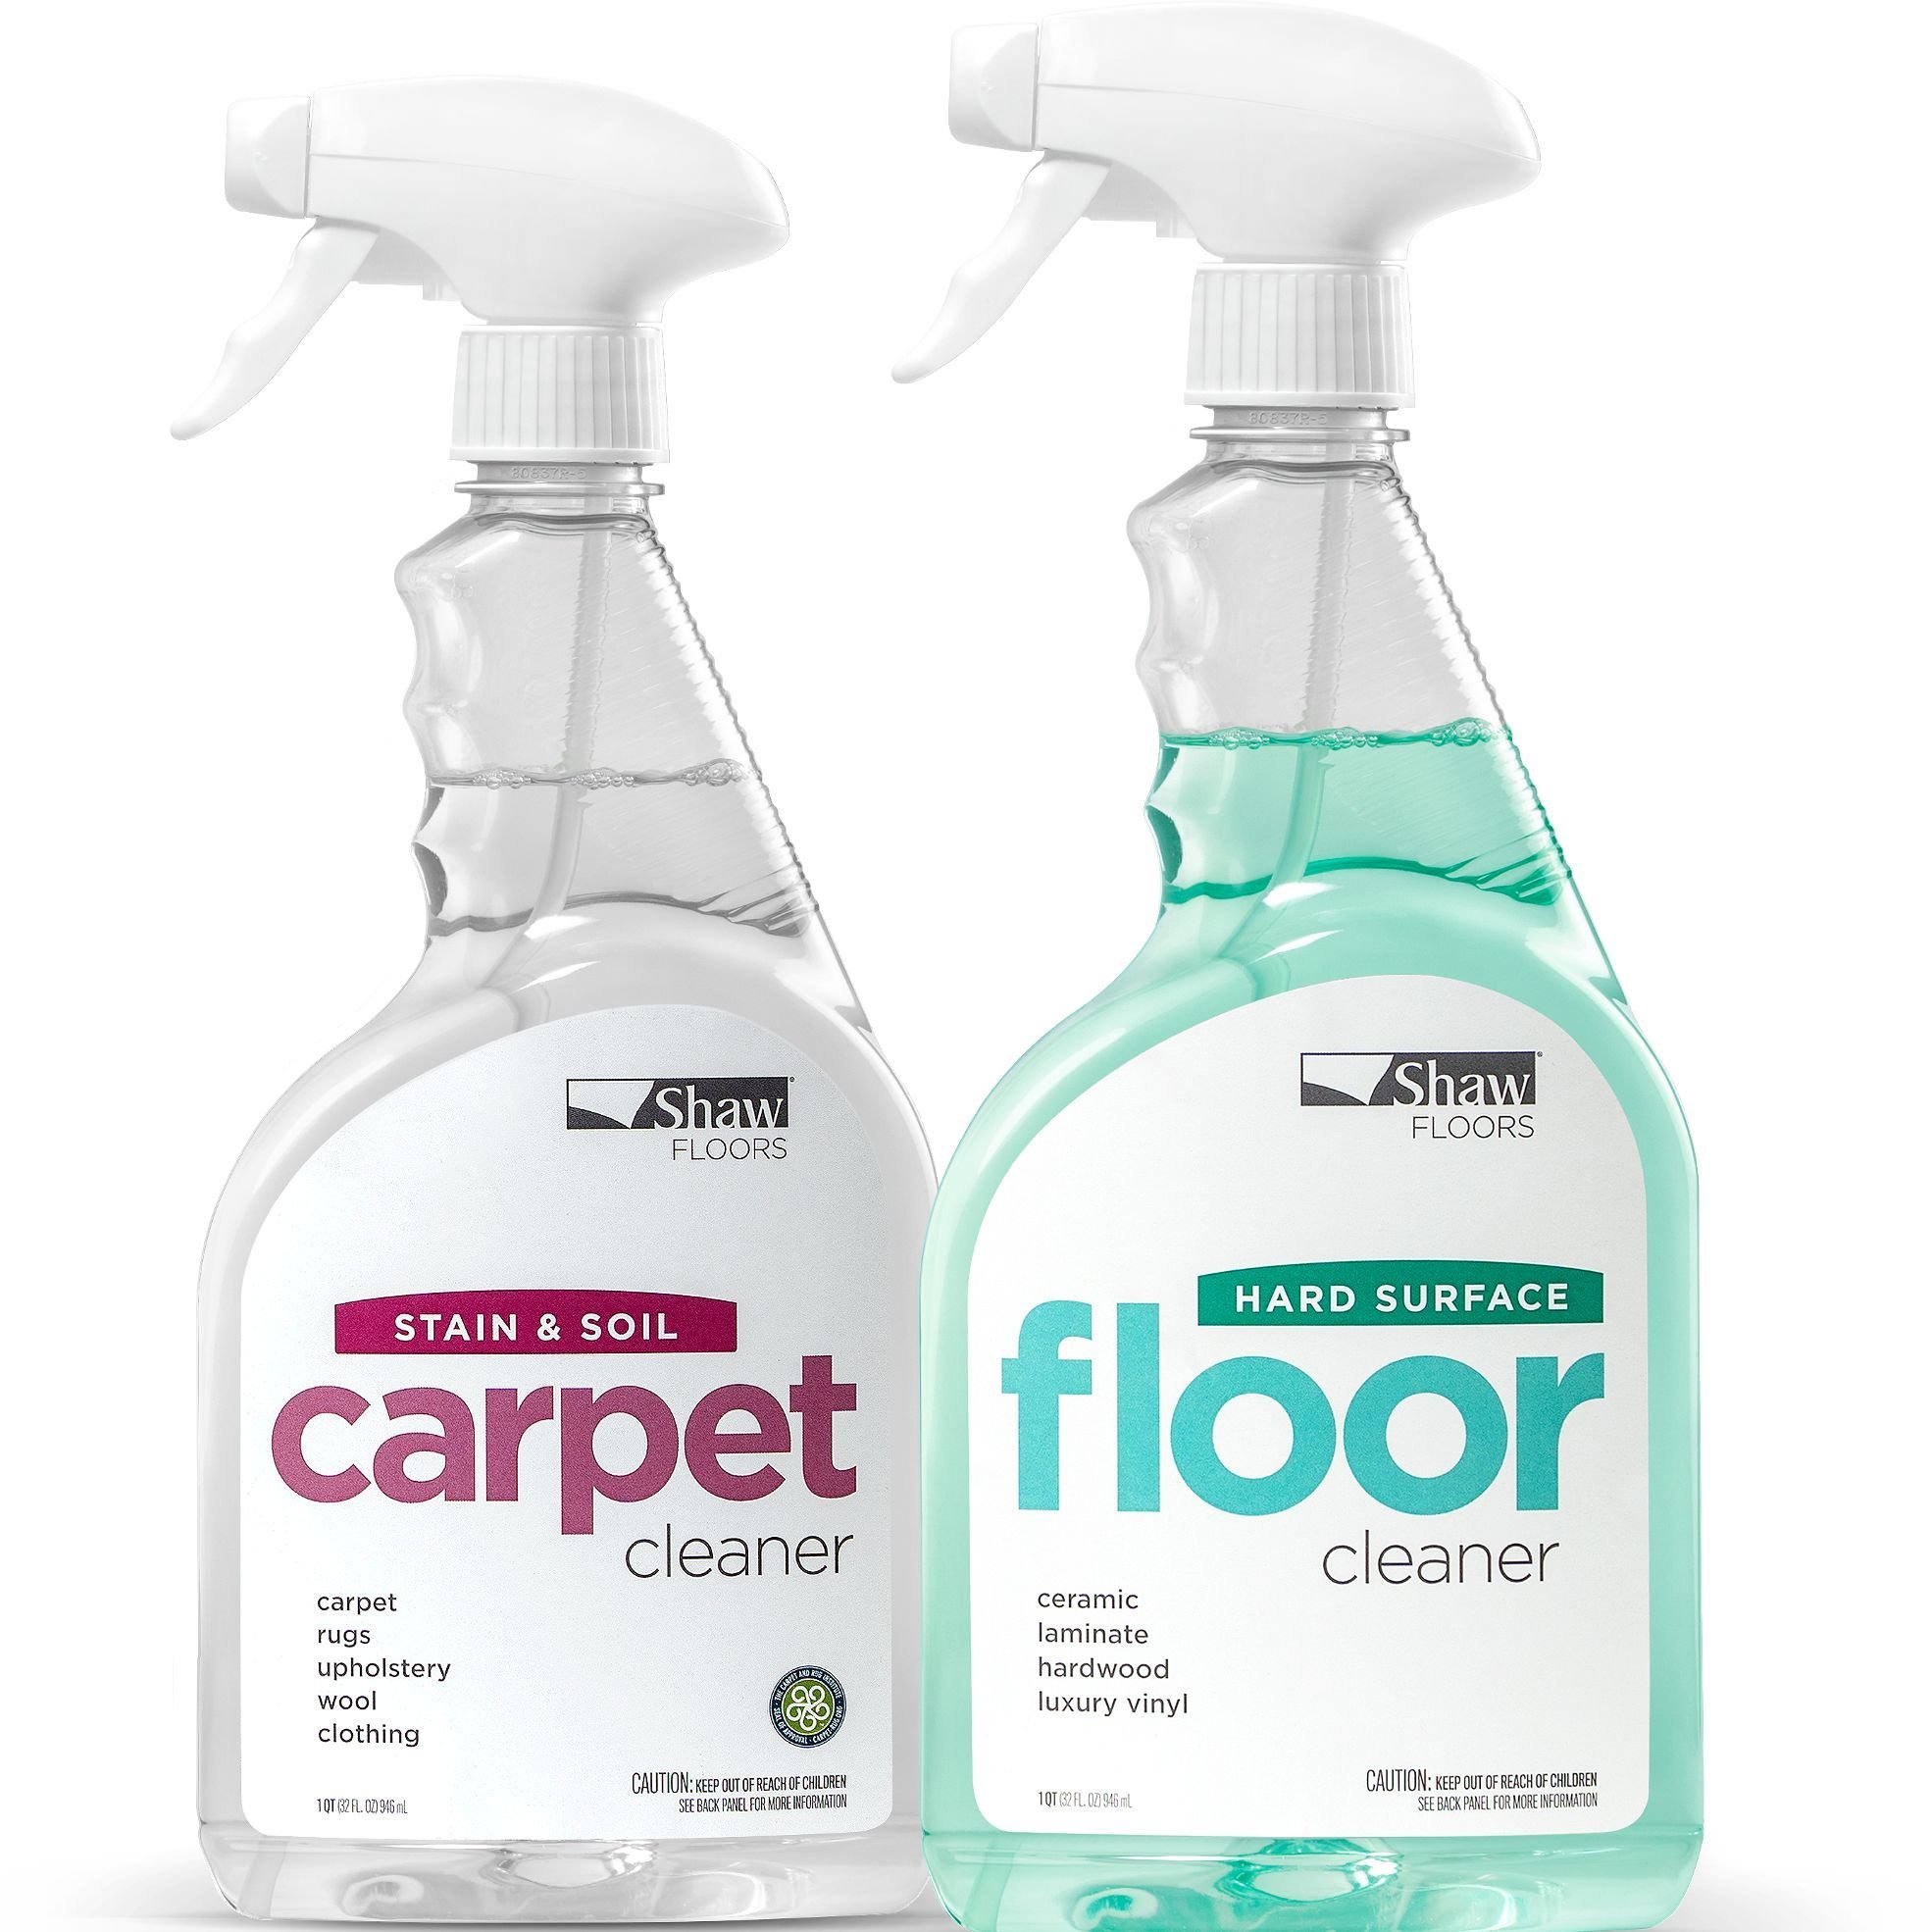 Cleaning solution for carpet and floor from Milford Floor Covering in Milford